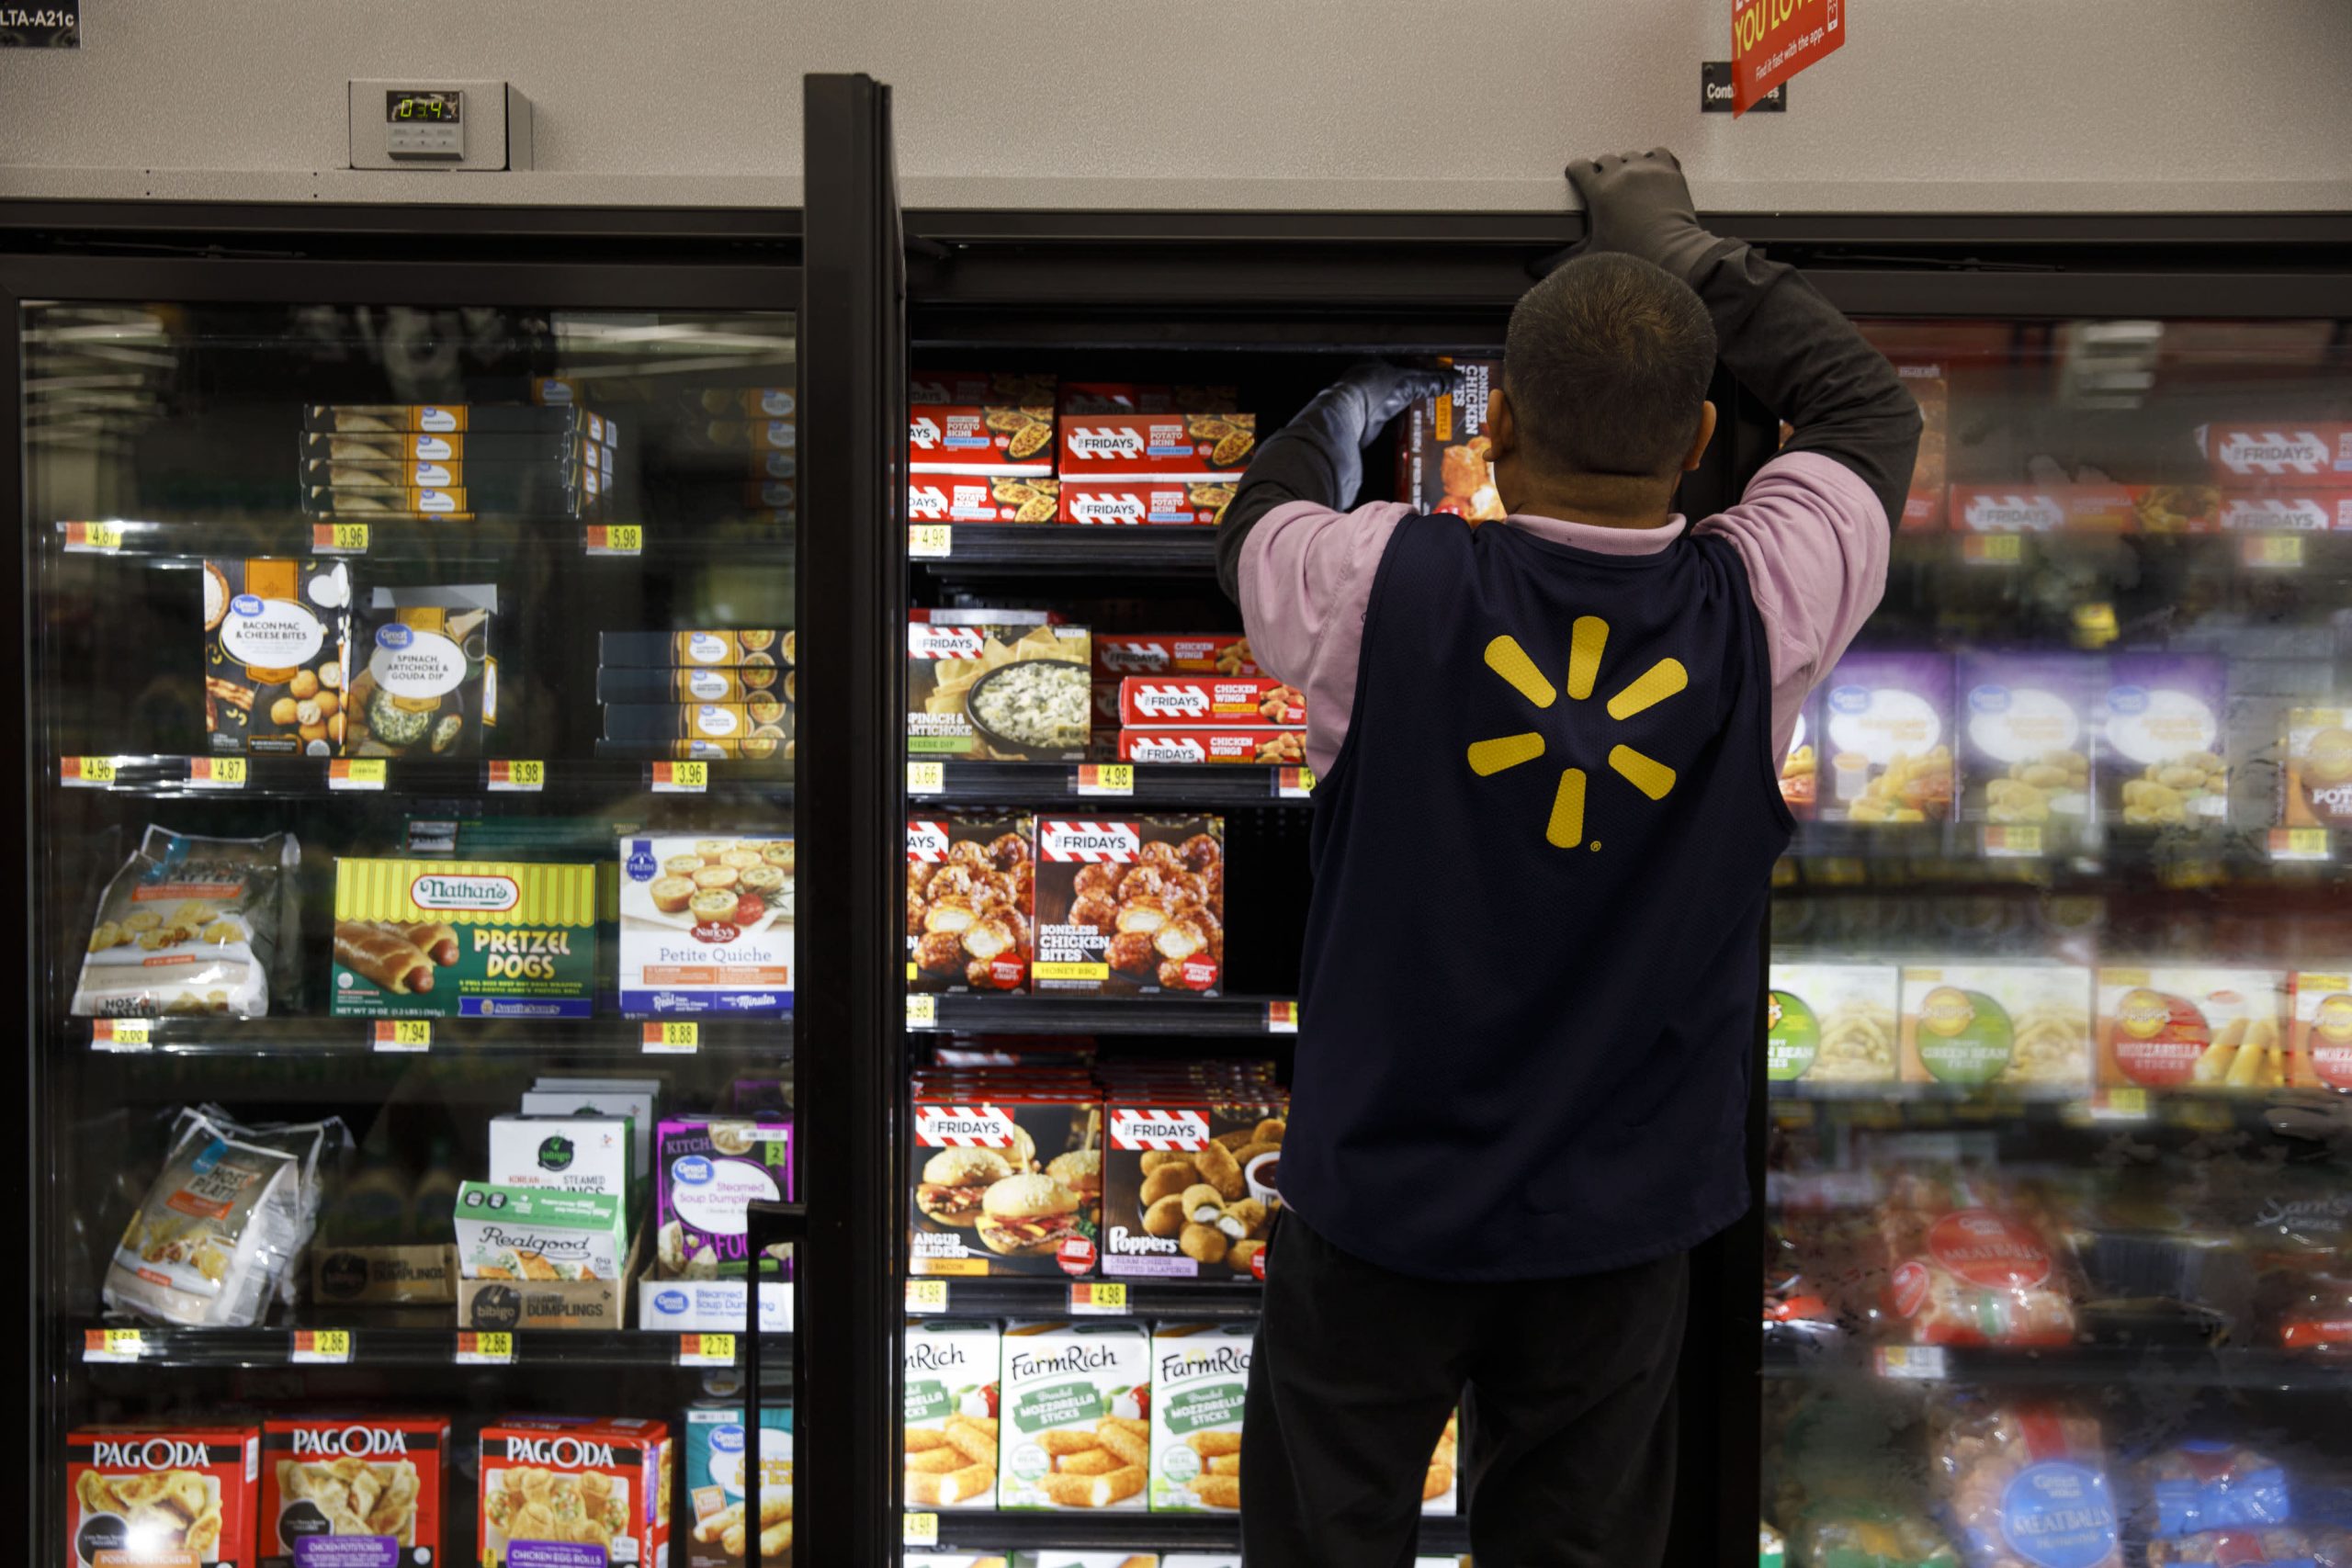 Walmart’s earnings may signal if shoppers getting spooked by inflation